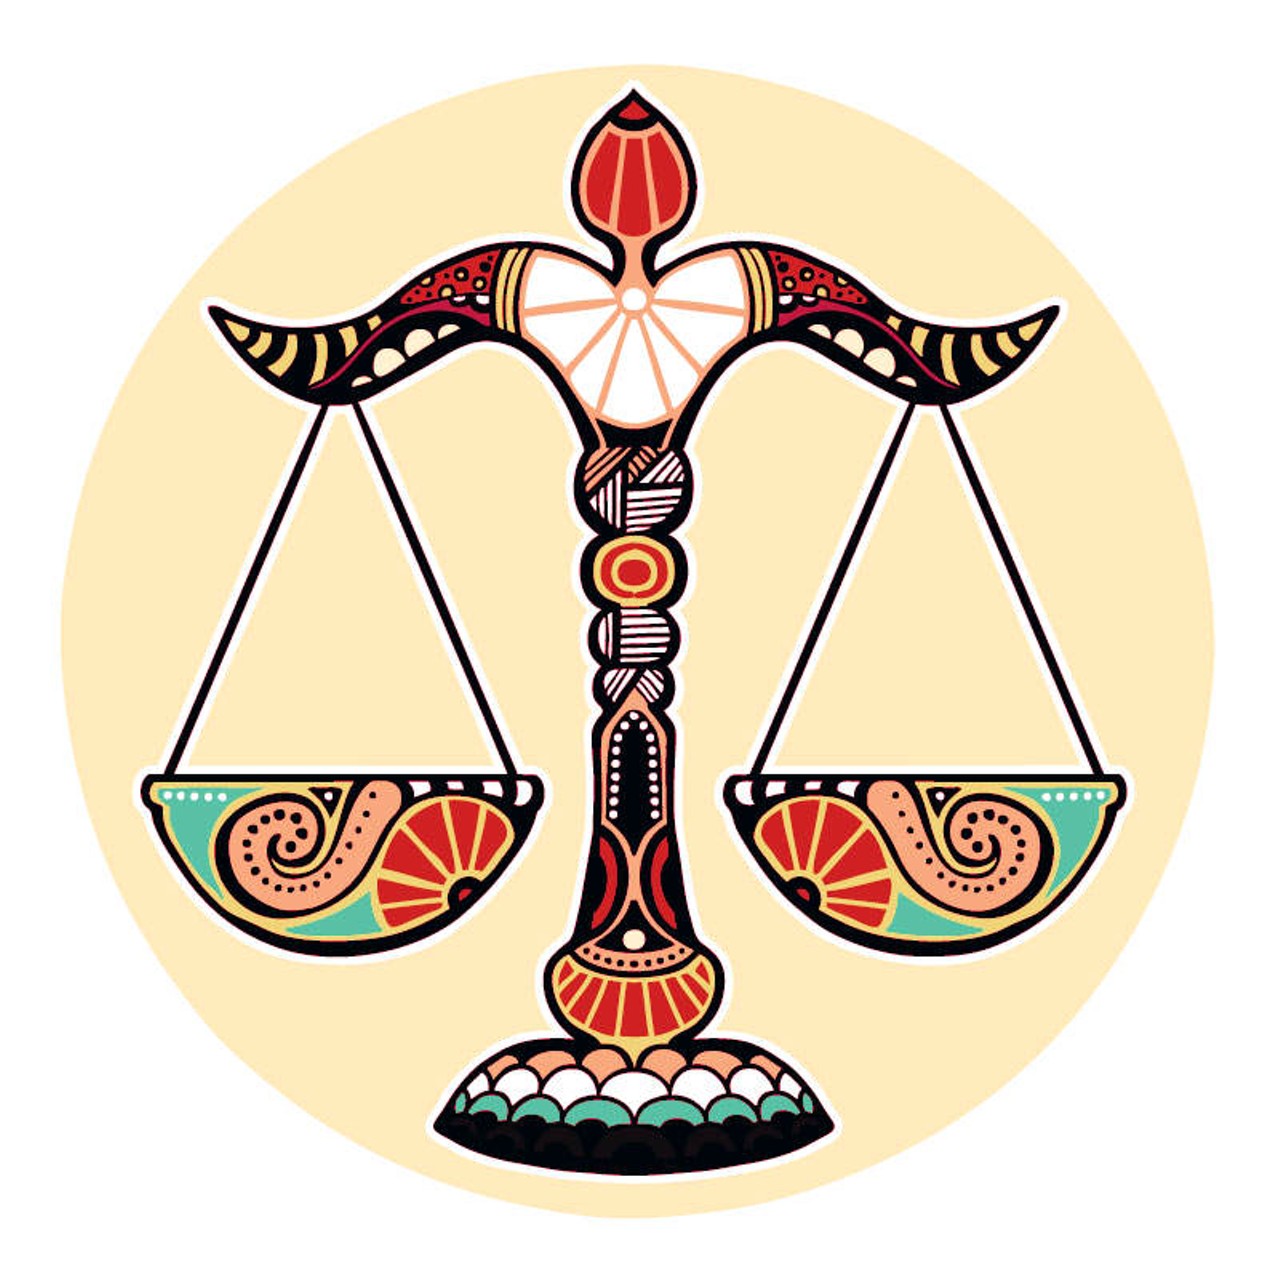 LIBRA: September 21 &#150; October 20
You had just about enough. As much as you would love to say you're on top of things, putting on a Happy Face and going with the flow stopped working for you a couple of weeks ago. With Jupiter rolling through your sign you should be feeling better and things could be looking up, in no time. If there are opportunities to travel take them; there is such a thing as the 'geographical cure'. Short trips or longer voyages, on vacation, or to combine business with pleasure will put you in the right coordinates to hook up with what's next and take the edge off the latest round of blues.